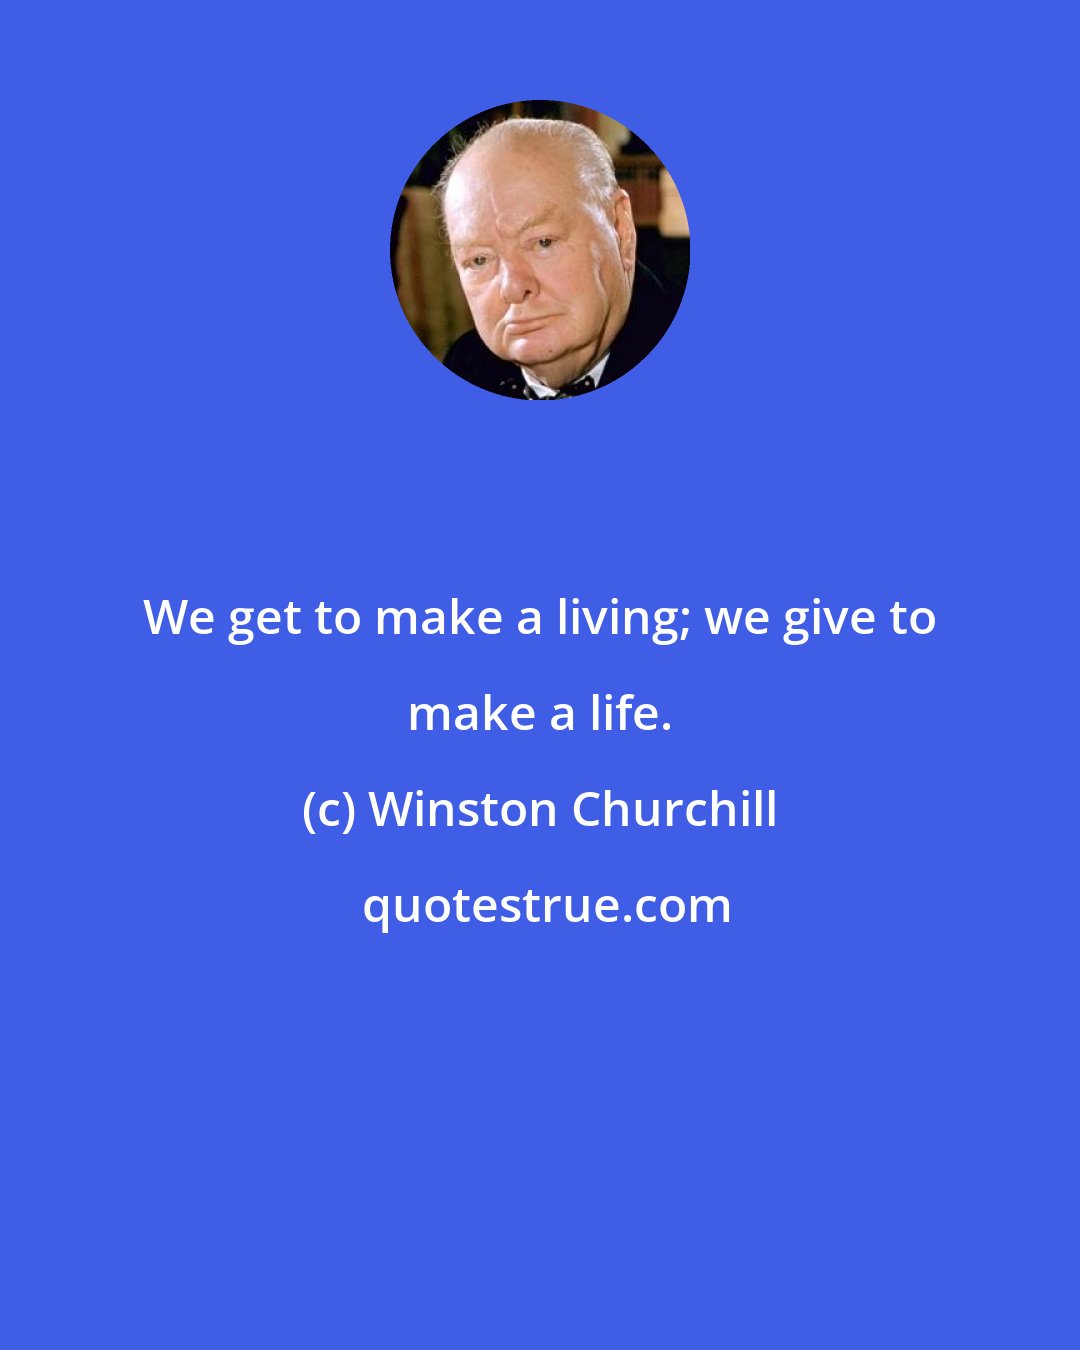 Winston Churchill: We get to make a living; we give to make a life.